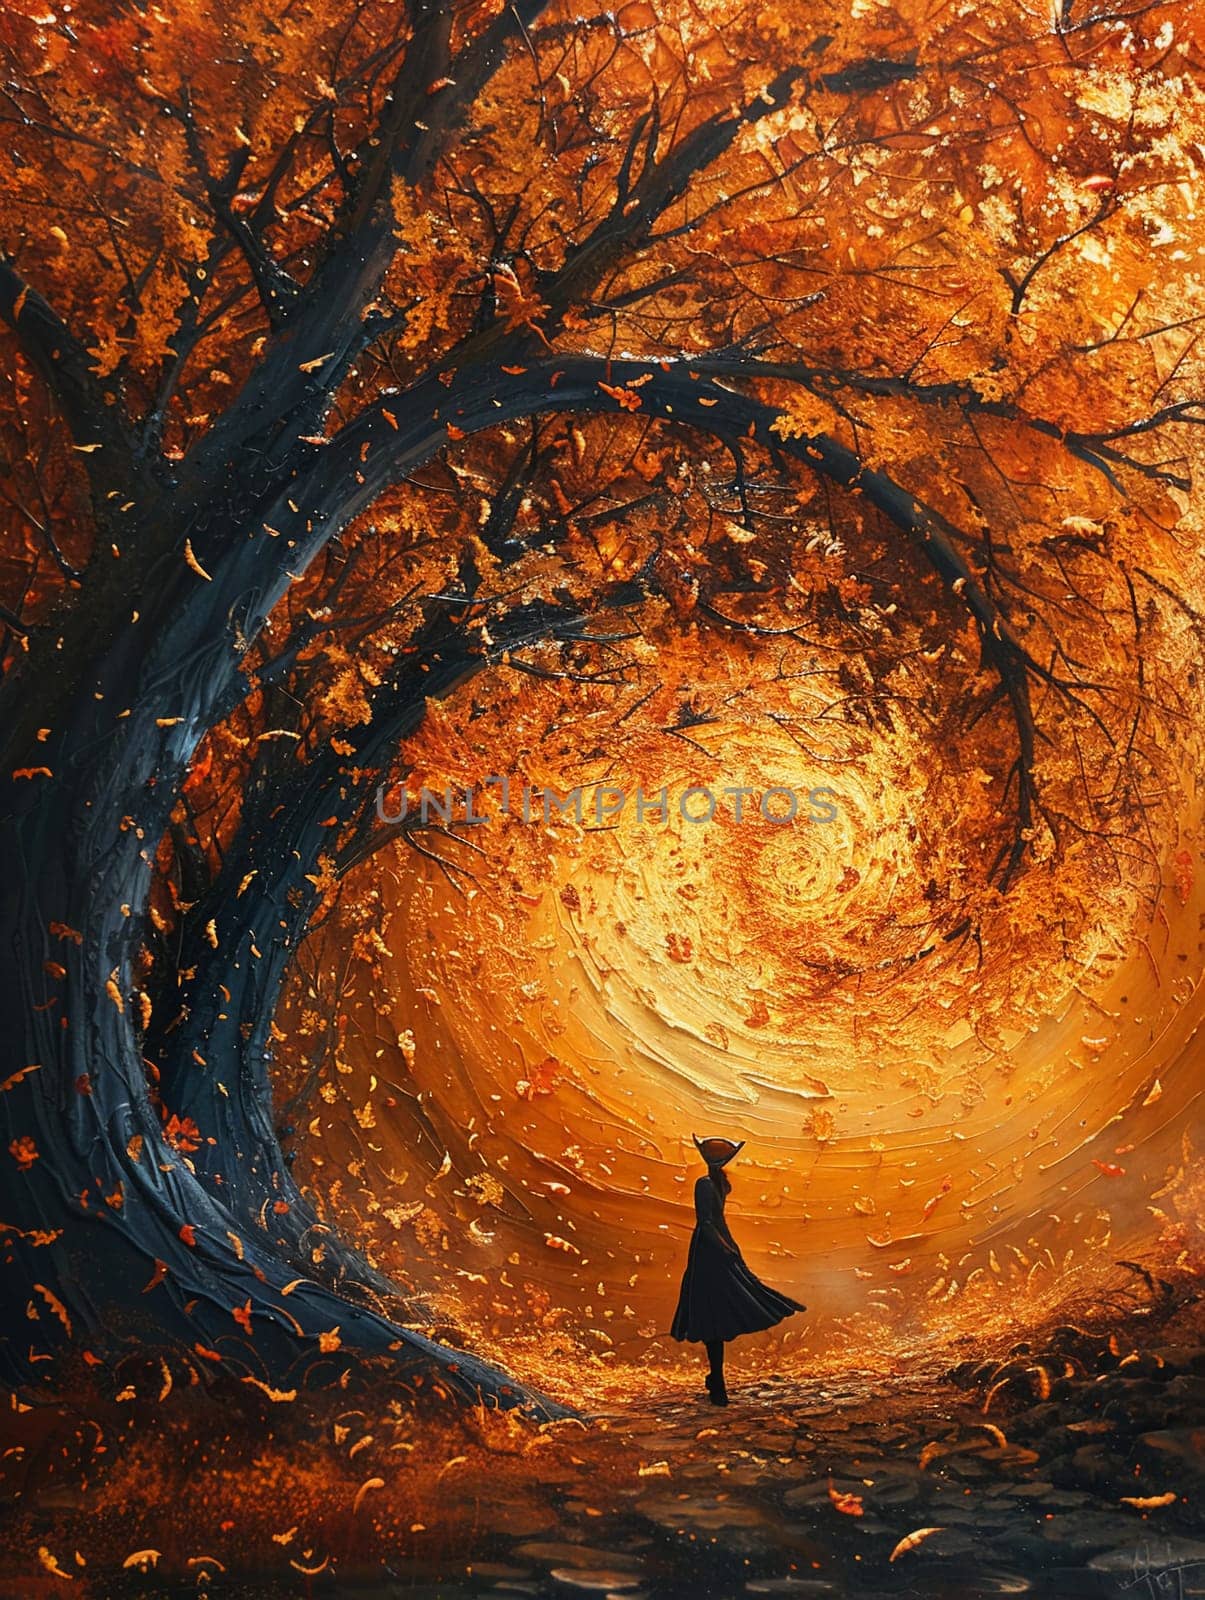 Artist lost in an autumn reverie, a symphony of leaves swirling in their imagination.